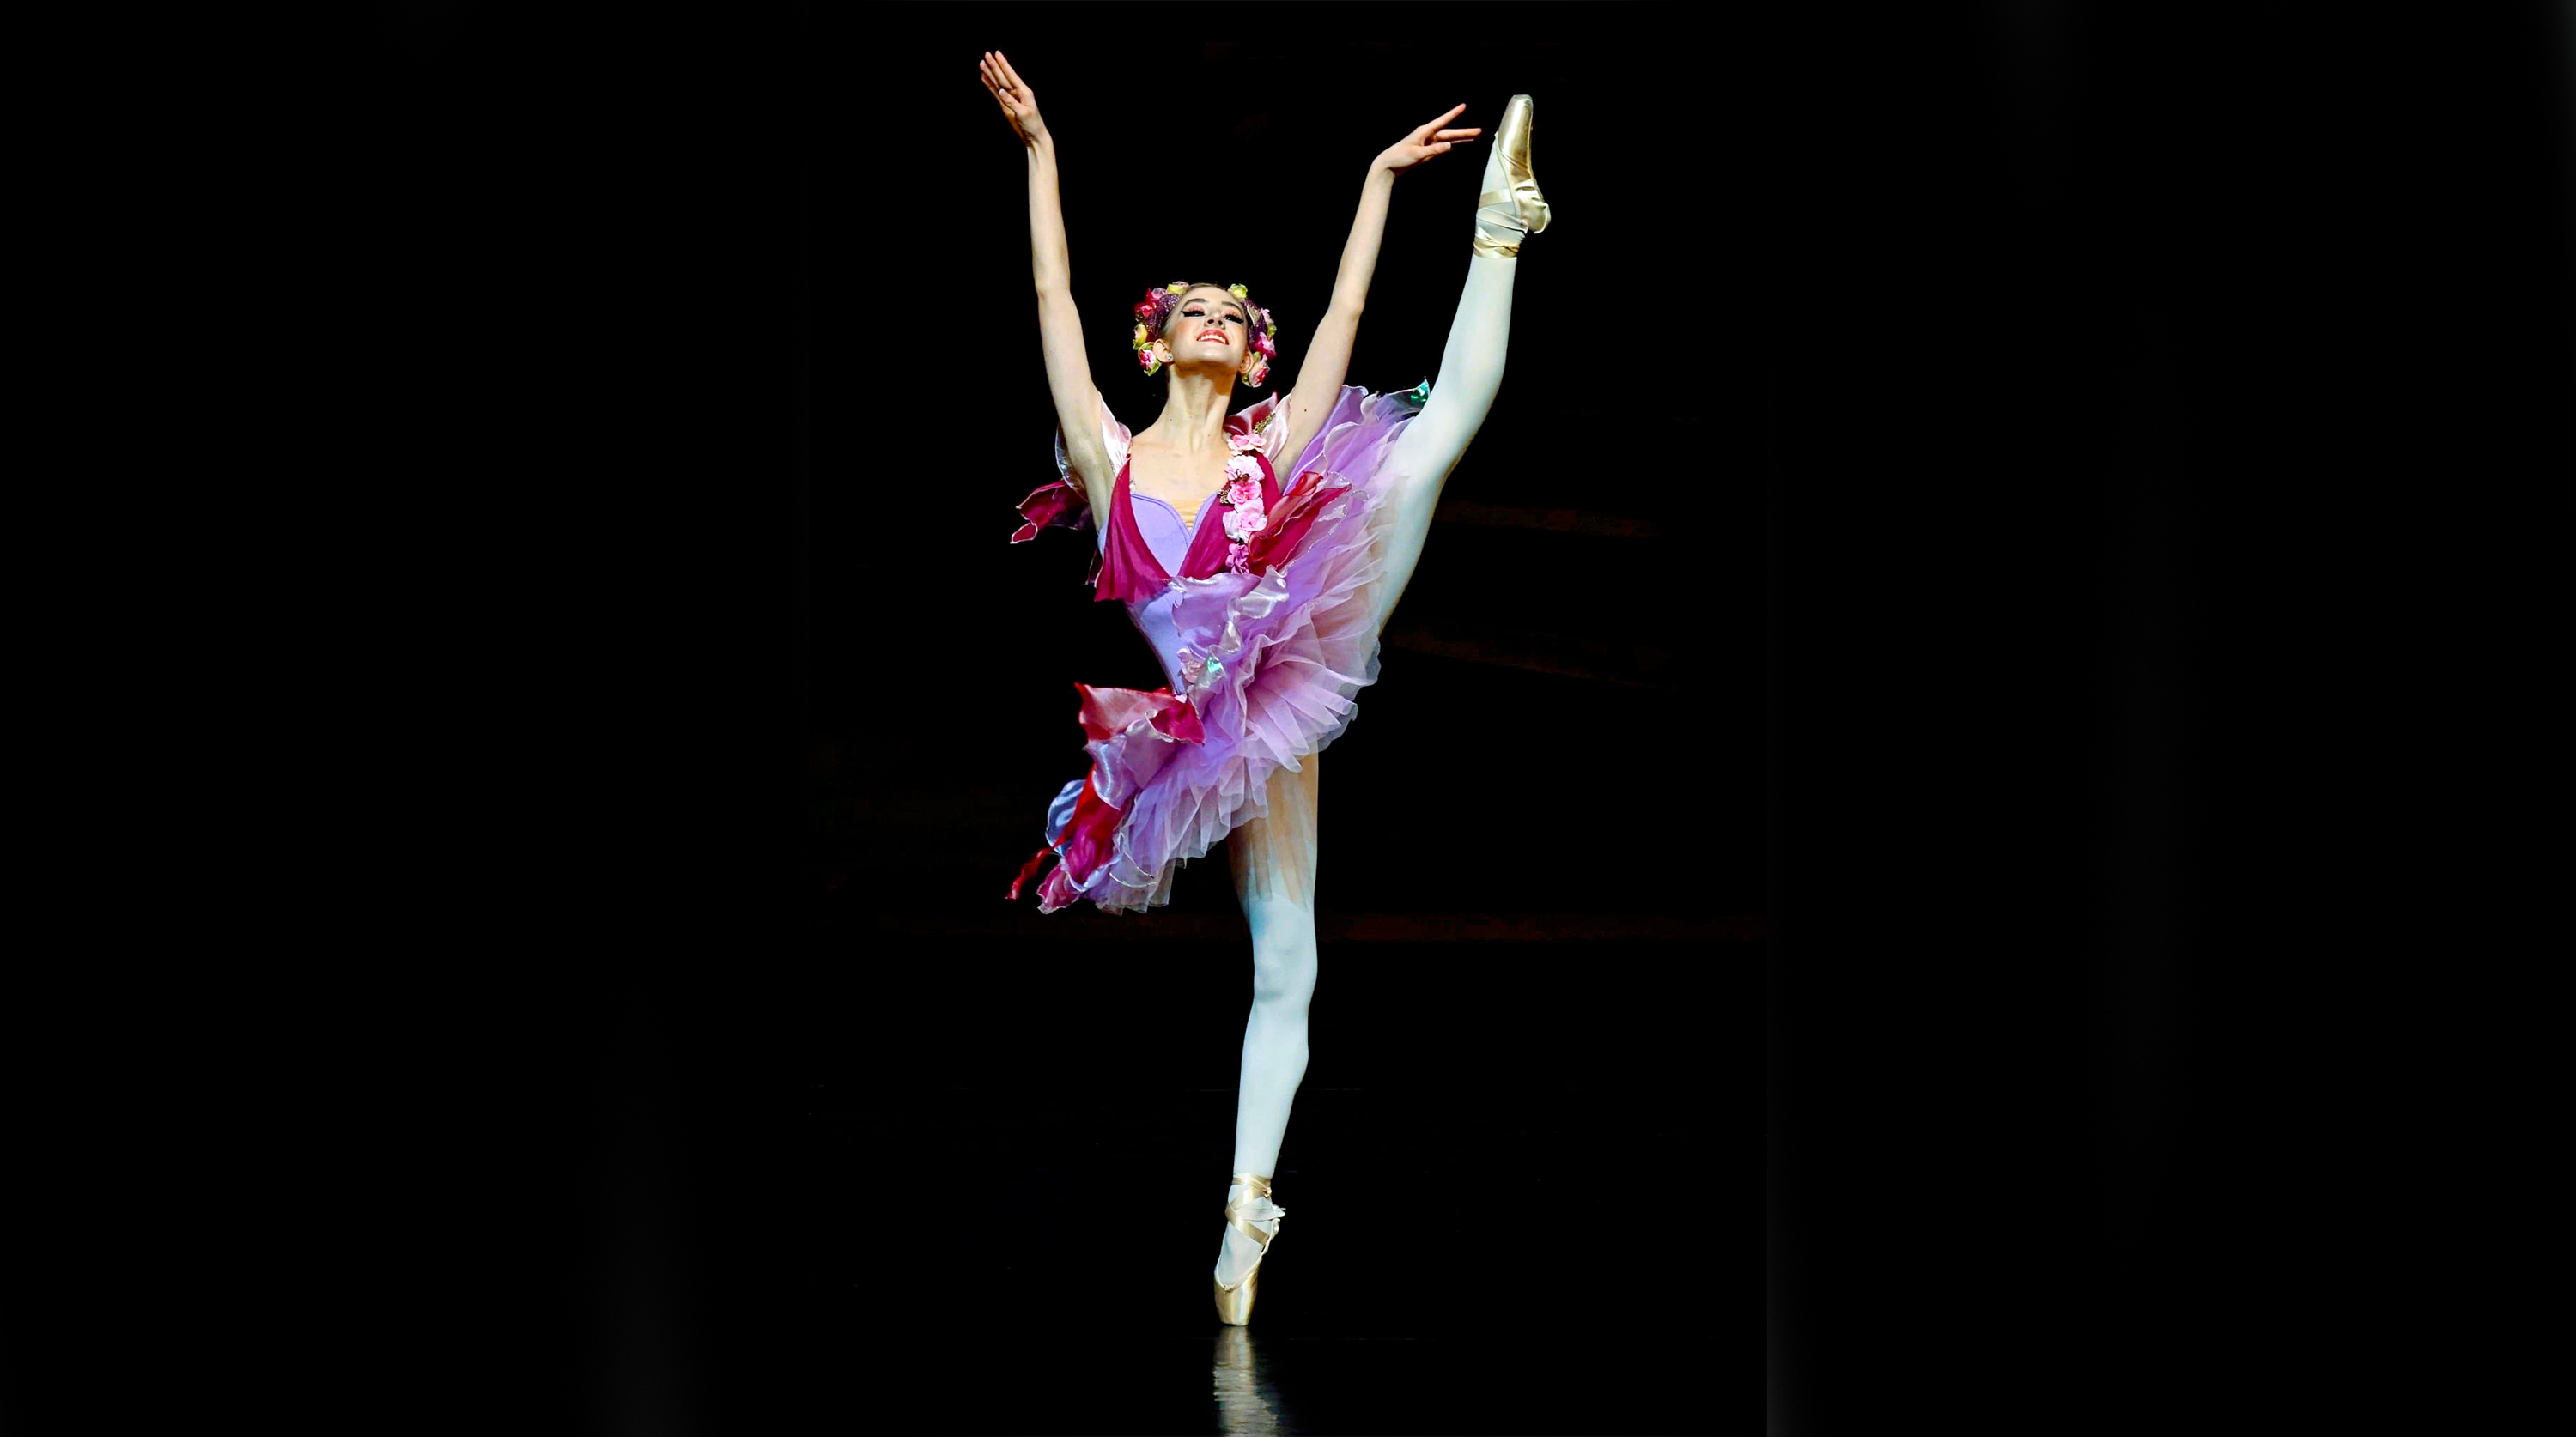 A female ballerina poses on pointe with her left leg in high a la seconde, her arms lifted in a "V" above her head. She wears a floral-themed magenta and lilac-colored tutu with rose adornment and a floral headpiece, with pink ballet tights and pointe shoes.